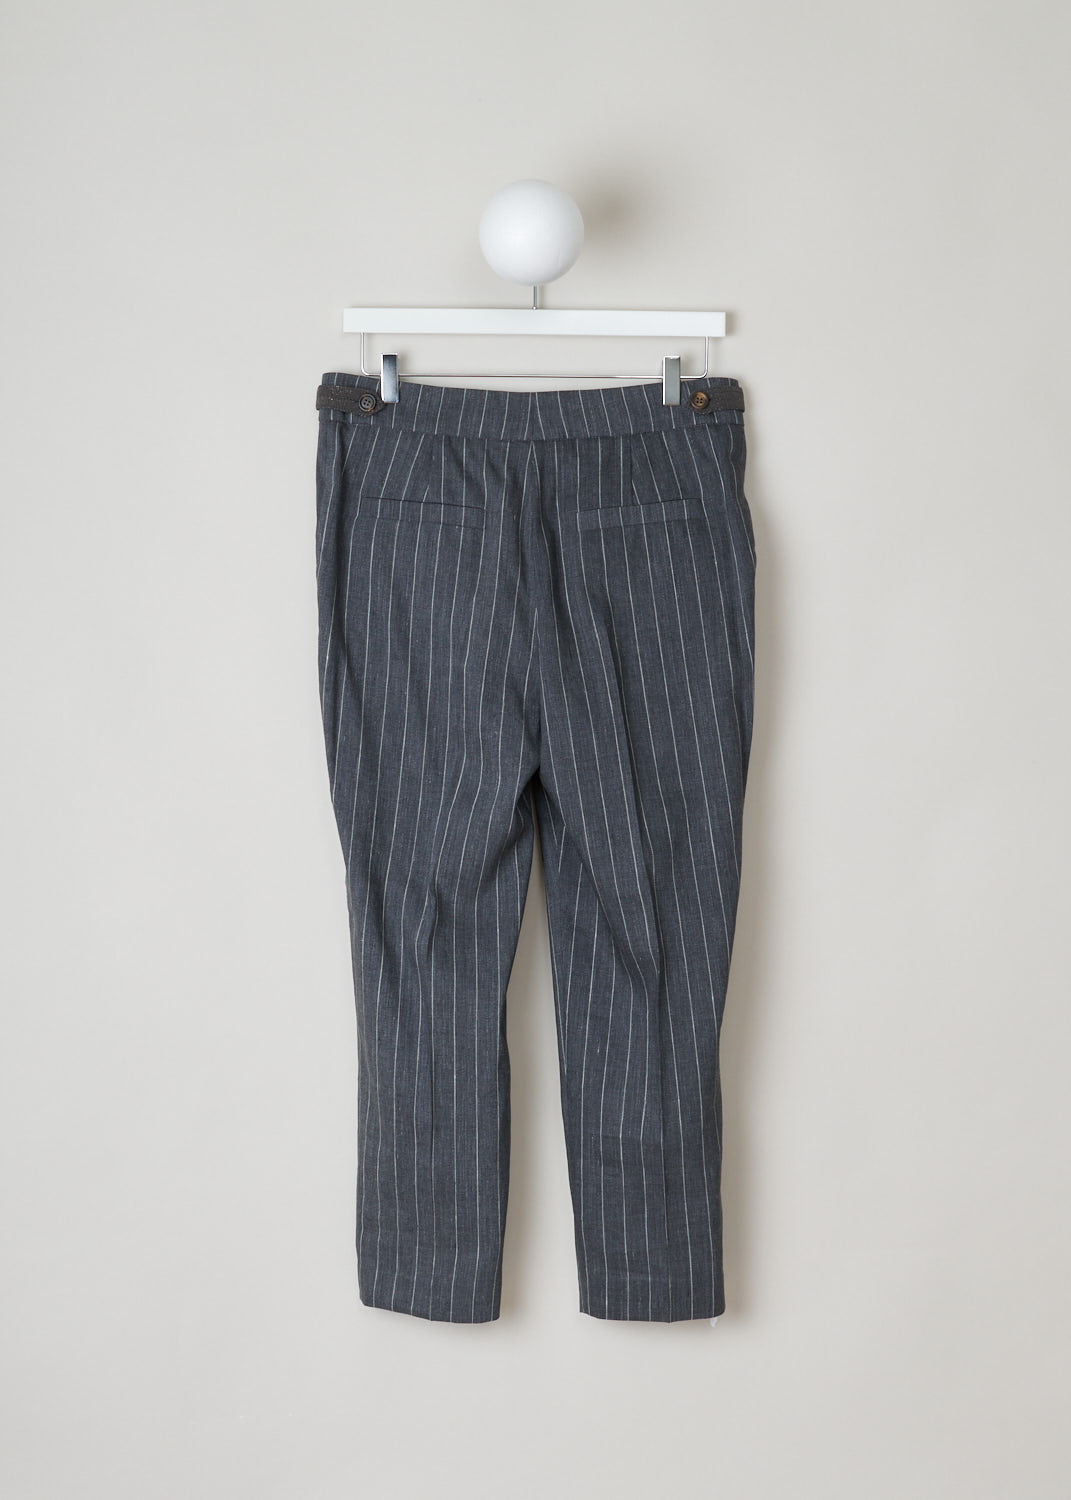 Brunello Cucinelli, mid grey pinstripe pants, MF554P6492_C002, grey white, back, Mid grey pants, made of a pinstripe fabric. A notable feature of this model are the side tabs, that are used instead of belt loops. Furthermore, this model has a wide fit and a cropped length. The attachment options on this model are metal clips, a zipper and a French bearer button.